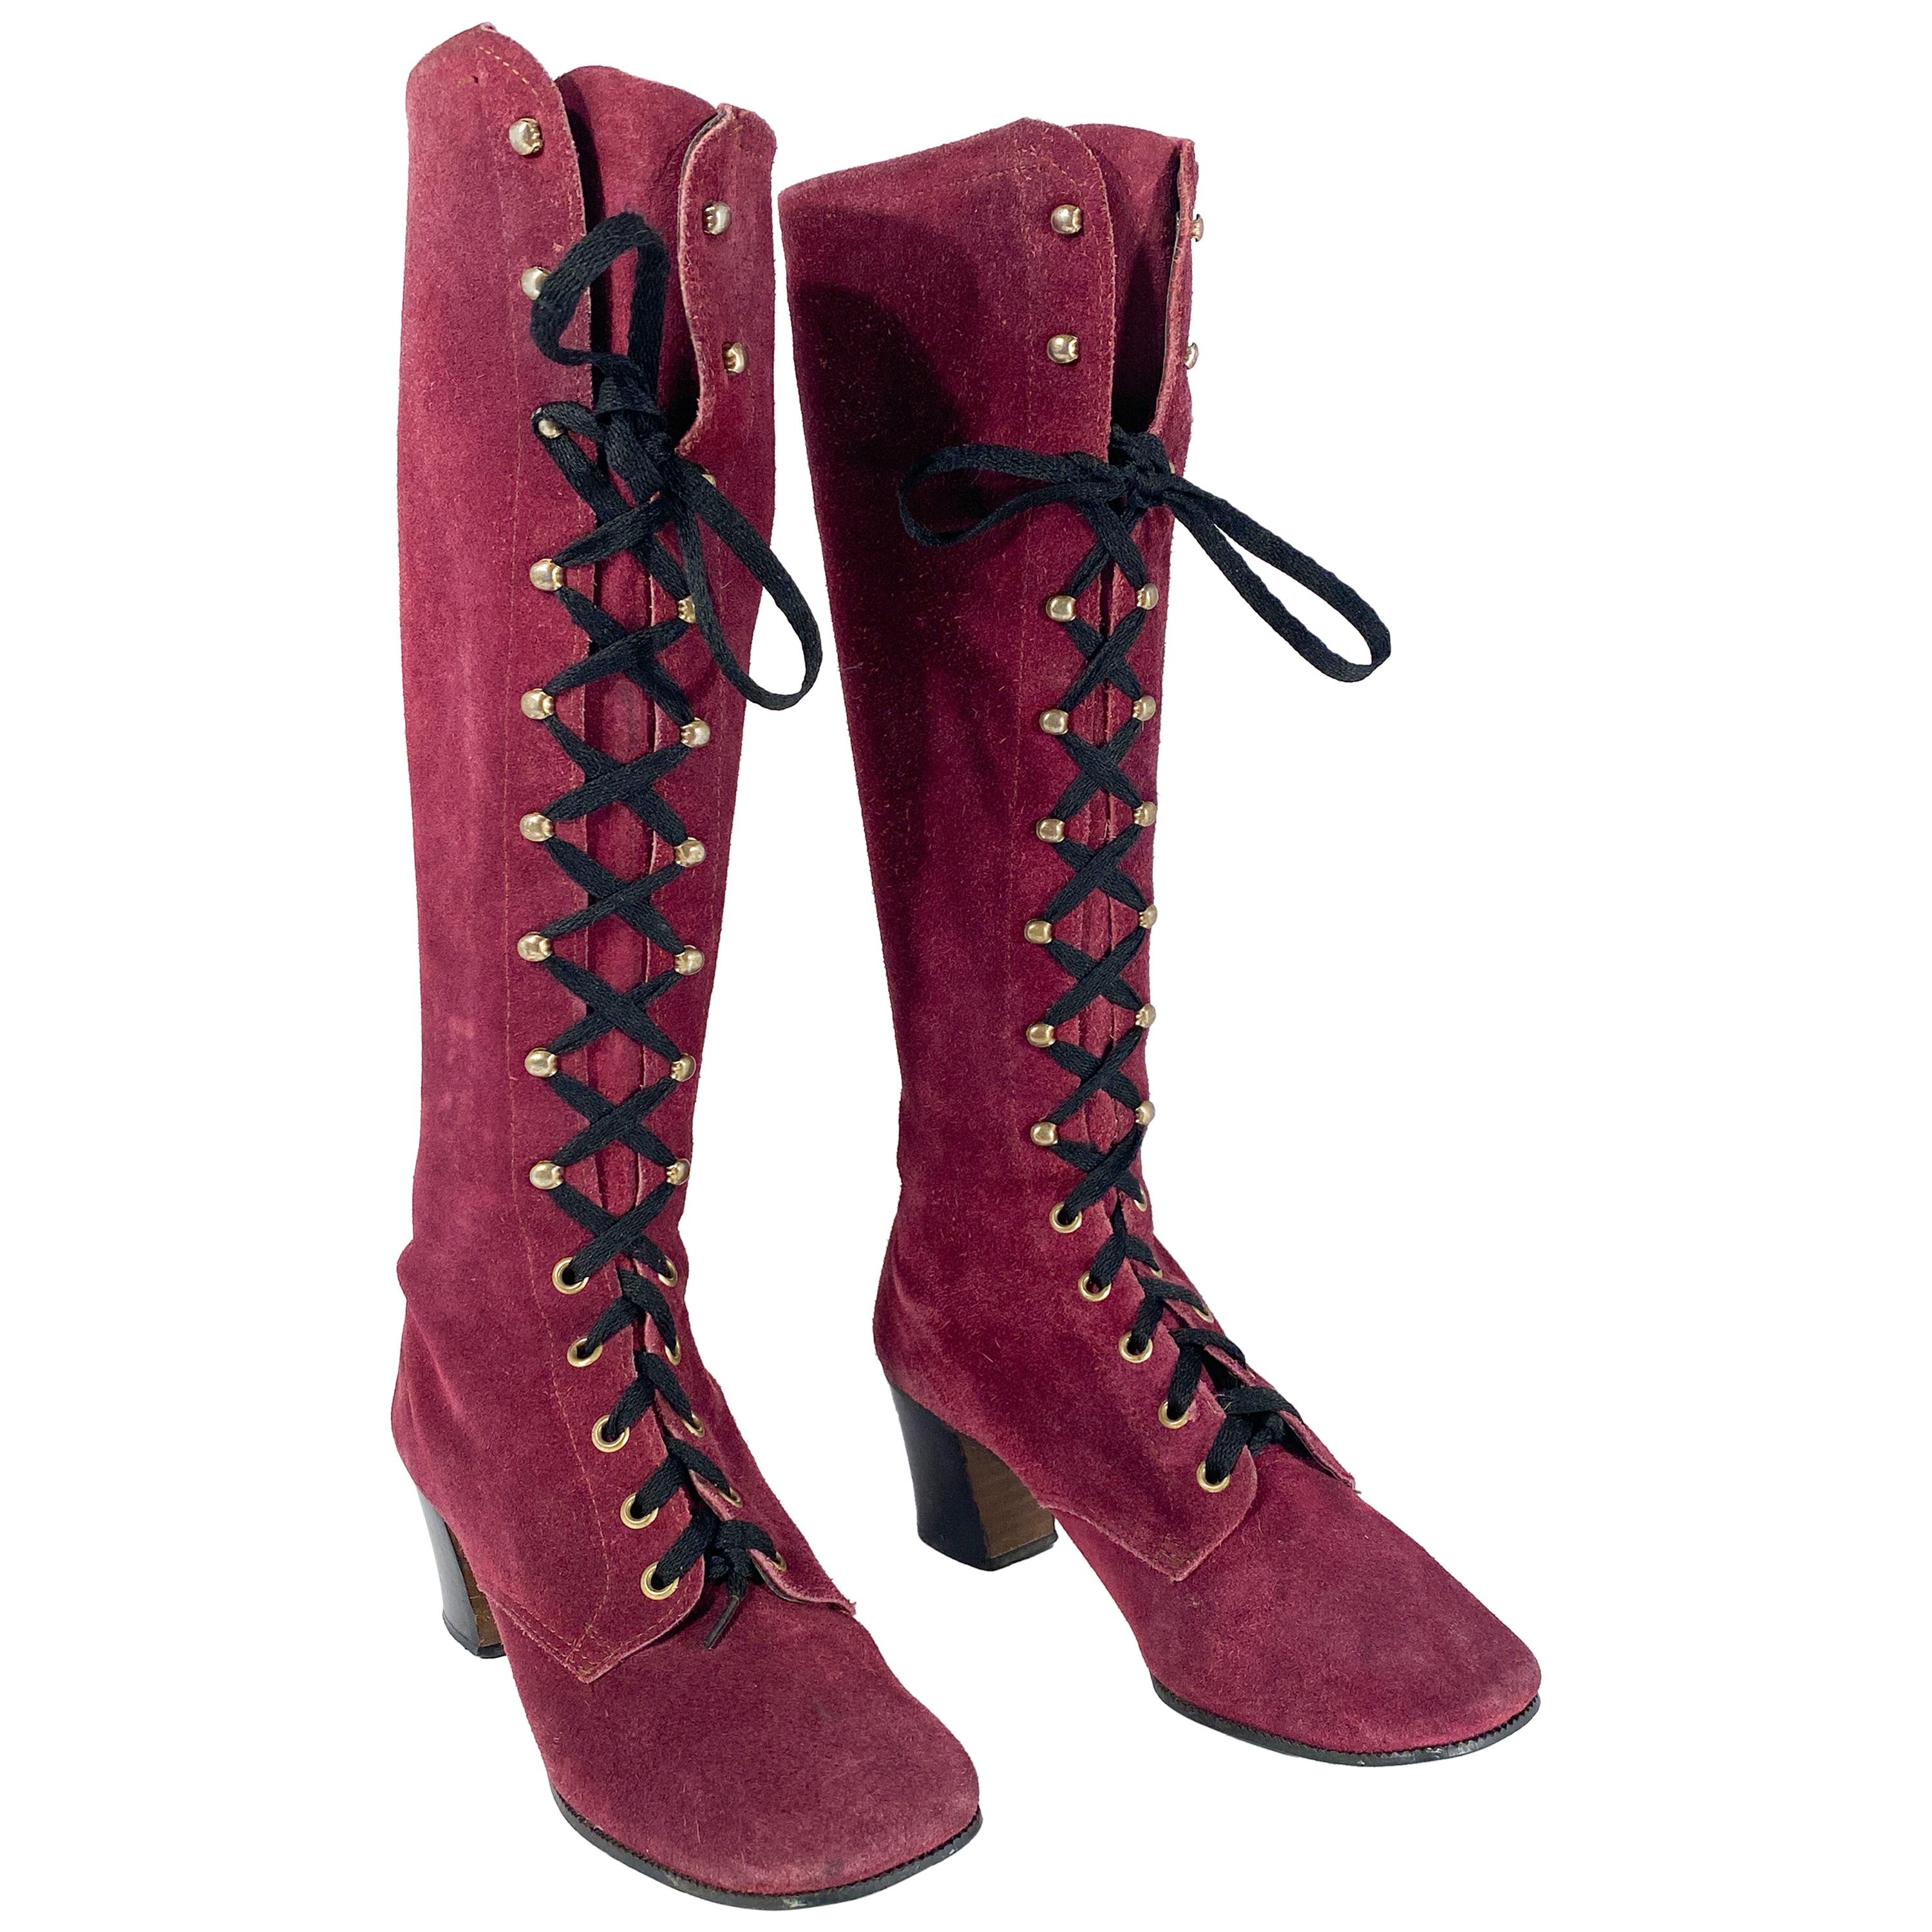 1960s/1970s Purple Suede Lace-up Boots